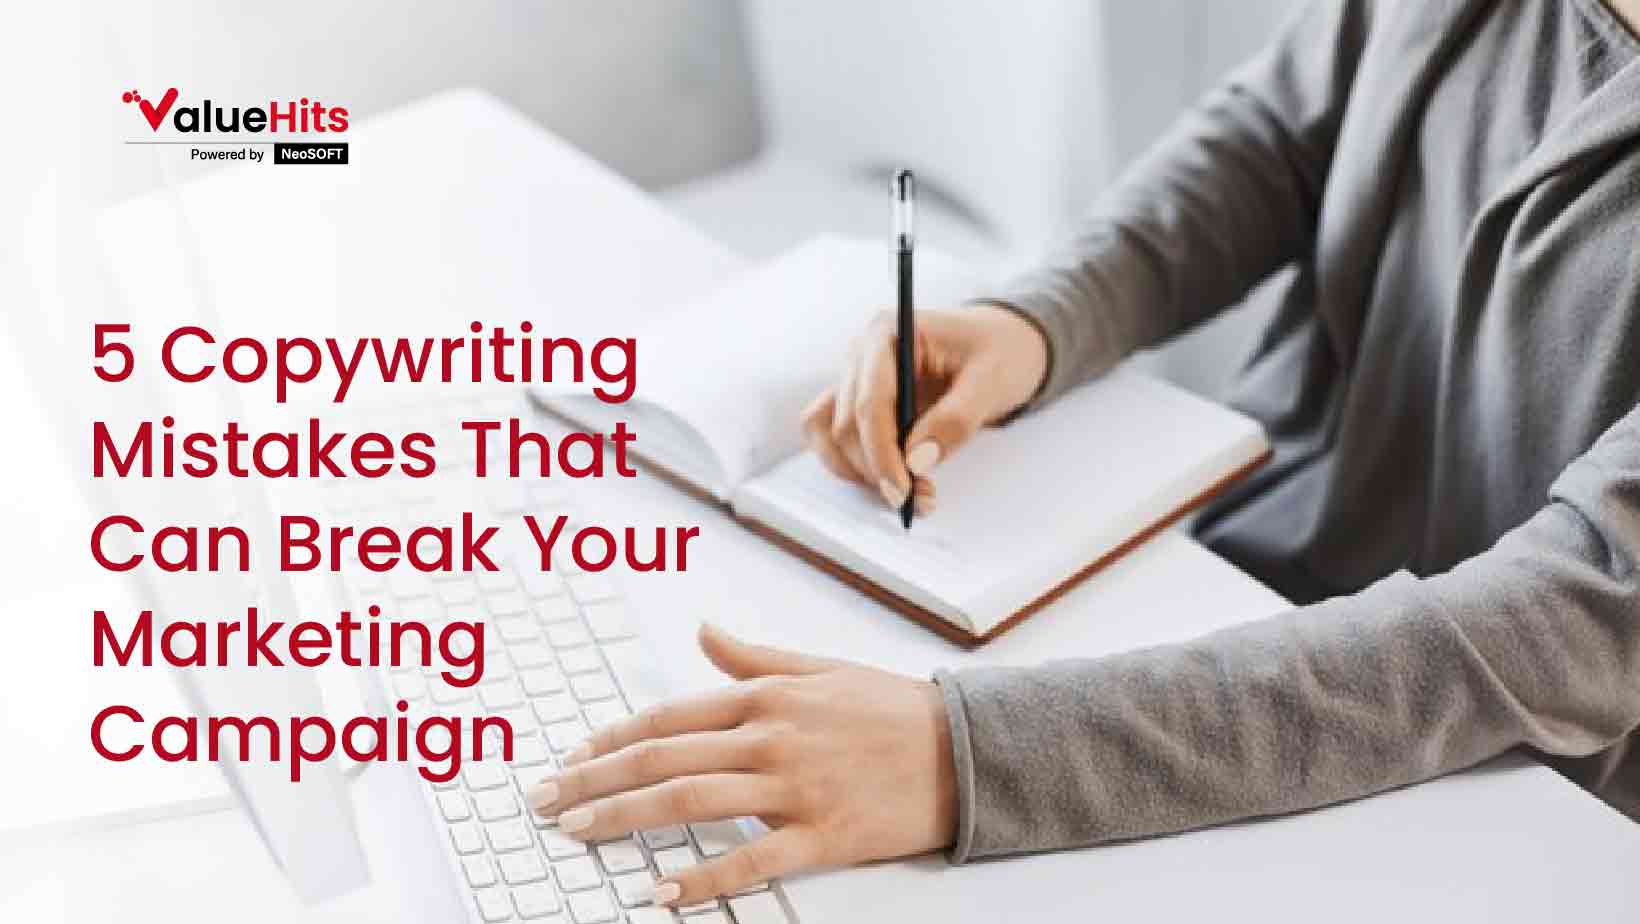 5 Copywriting Mistakes That Can Break Your Marketing Campaign